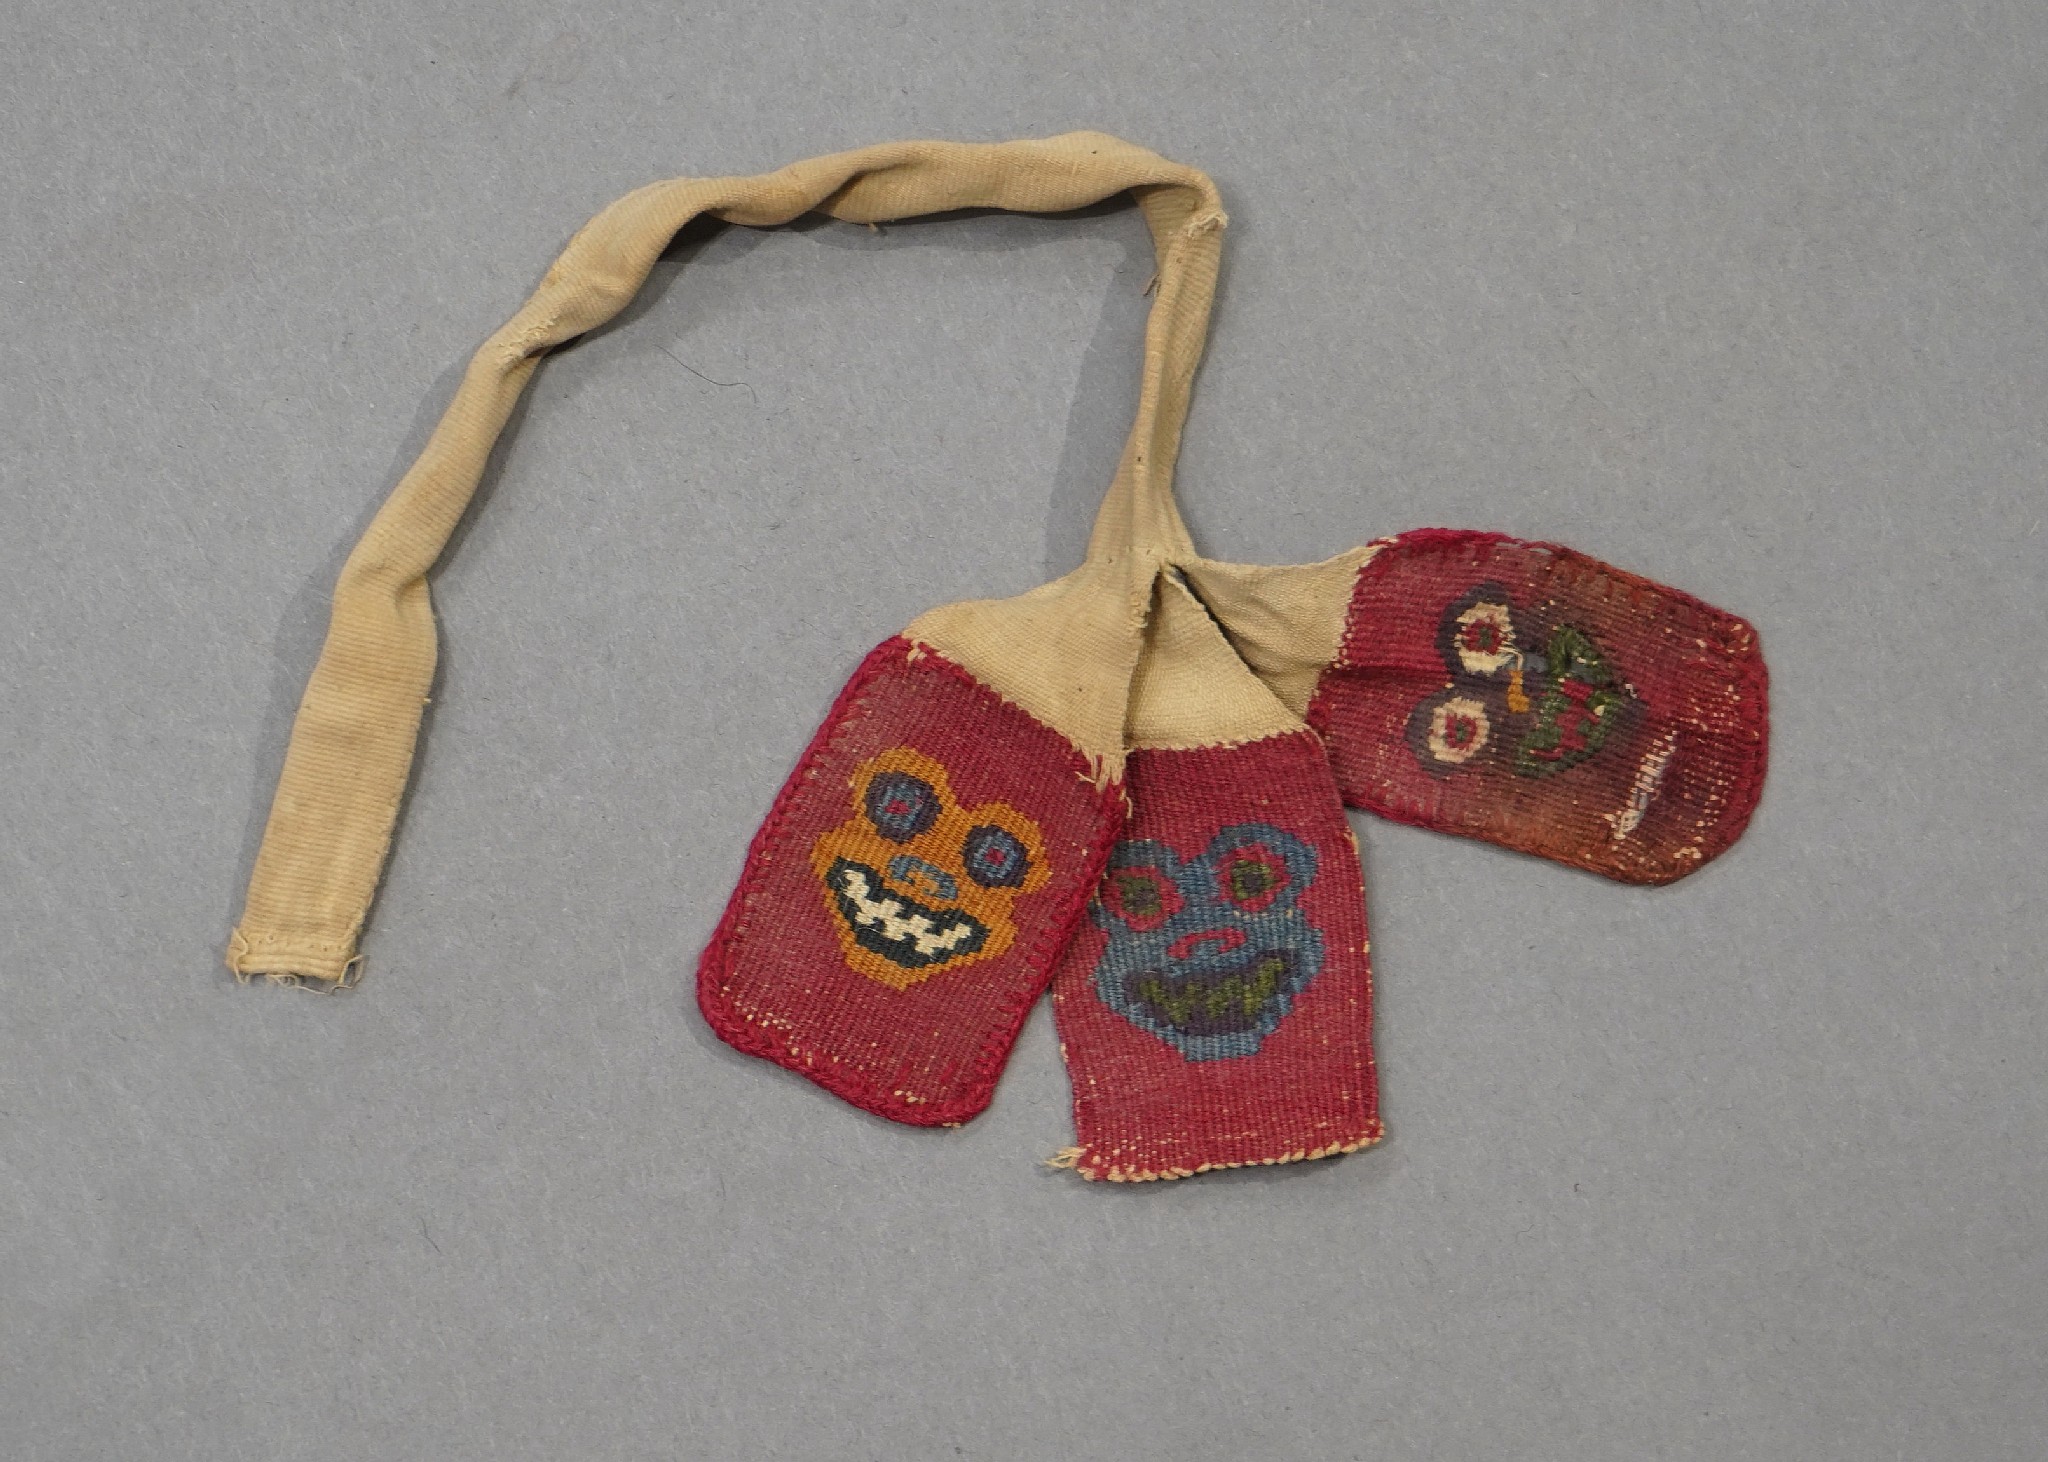 Peru, Three Wari Woven Tabs with Animal Heads
These woven tabs with stylized grinning toad faces were once part of a sash. The tabs are woven in orange, green, blue, white and black on a red ground.  A similar set of tabs is illustrated in Animal Myth and Magic,by Vanessa Moraga,  p. 110.
Media: Textile
Price Upon Request
91095a